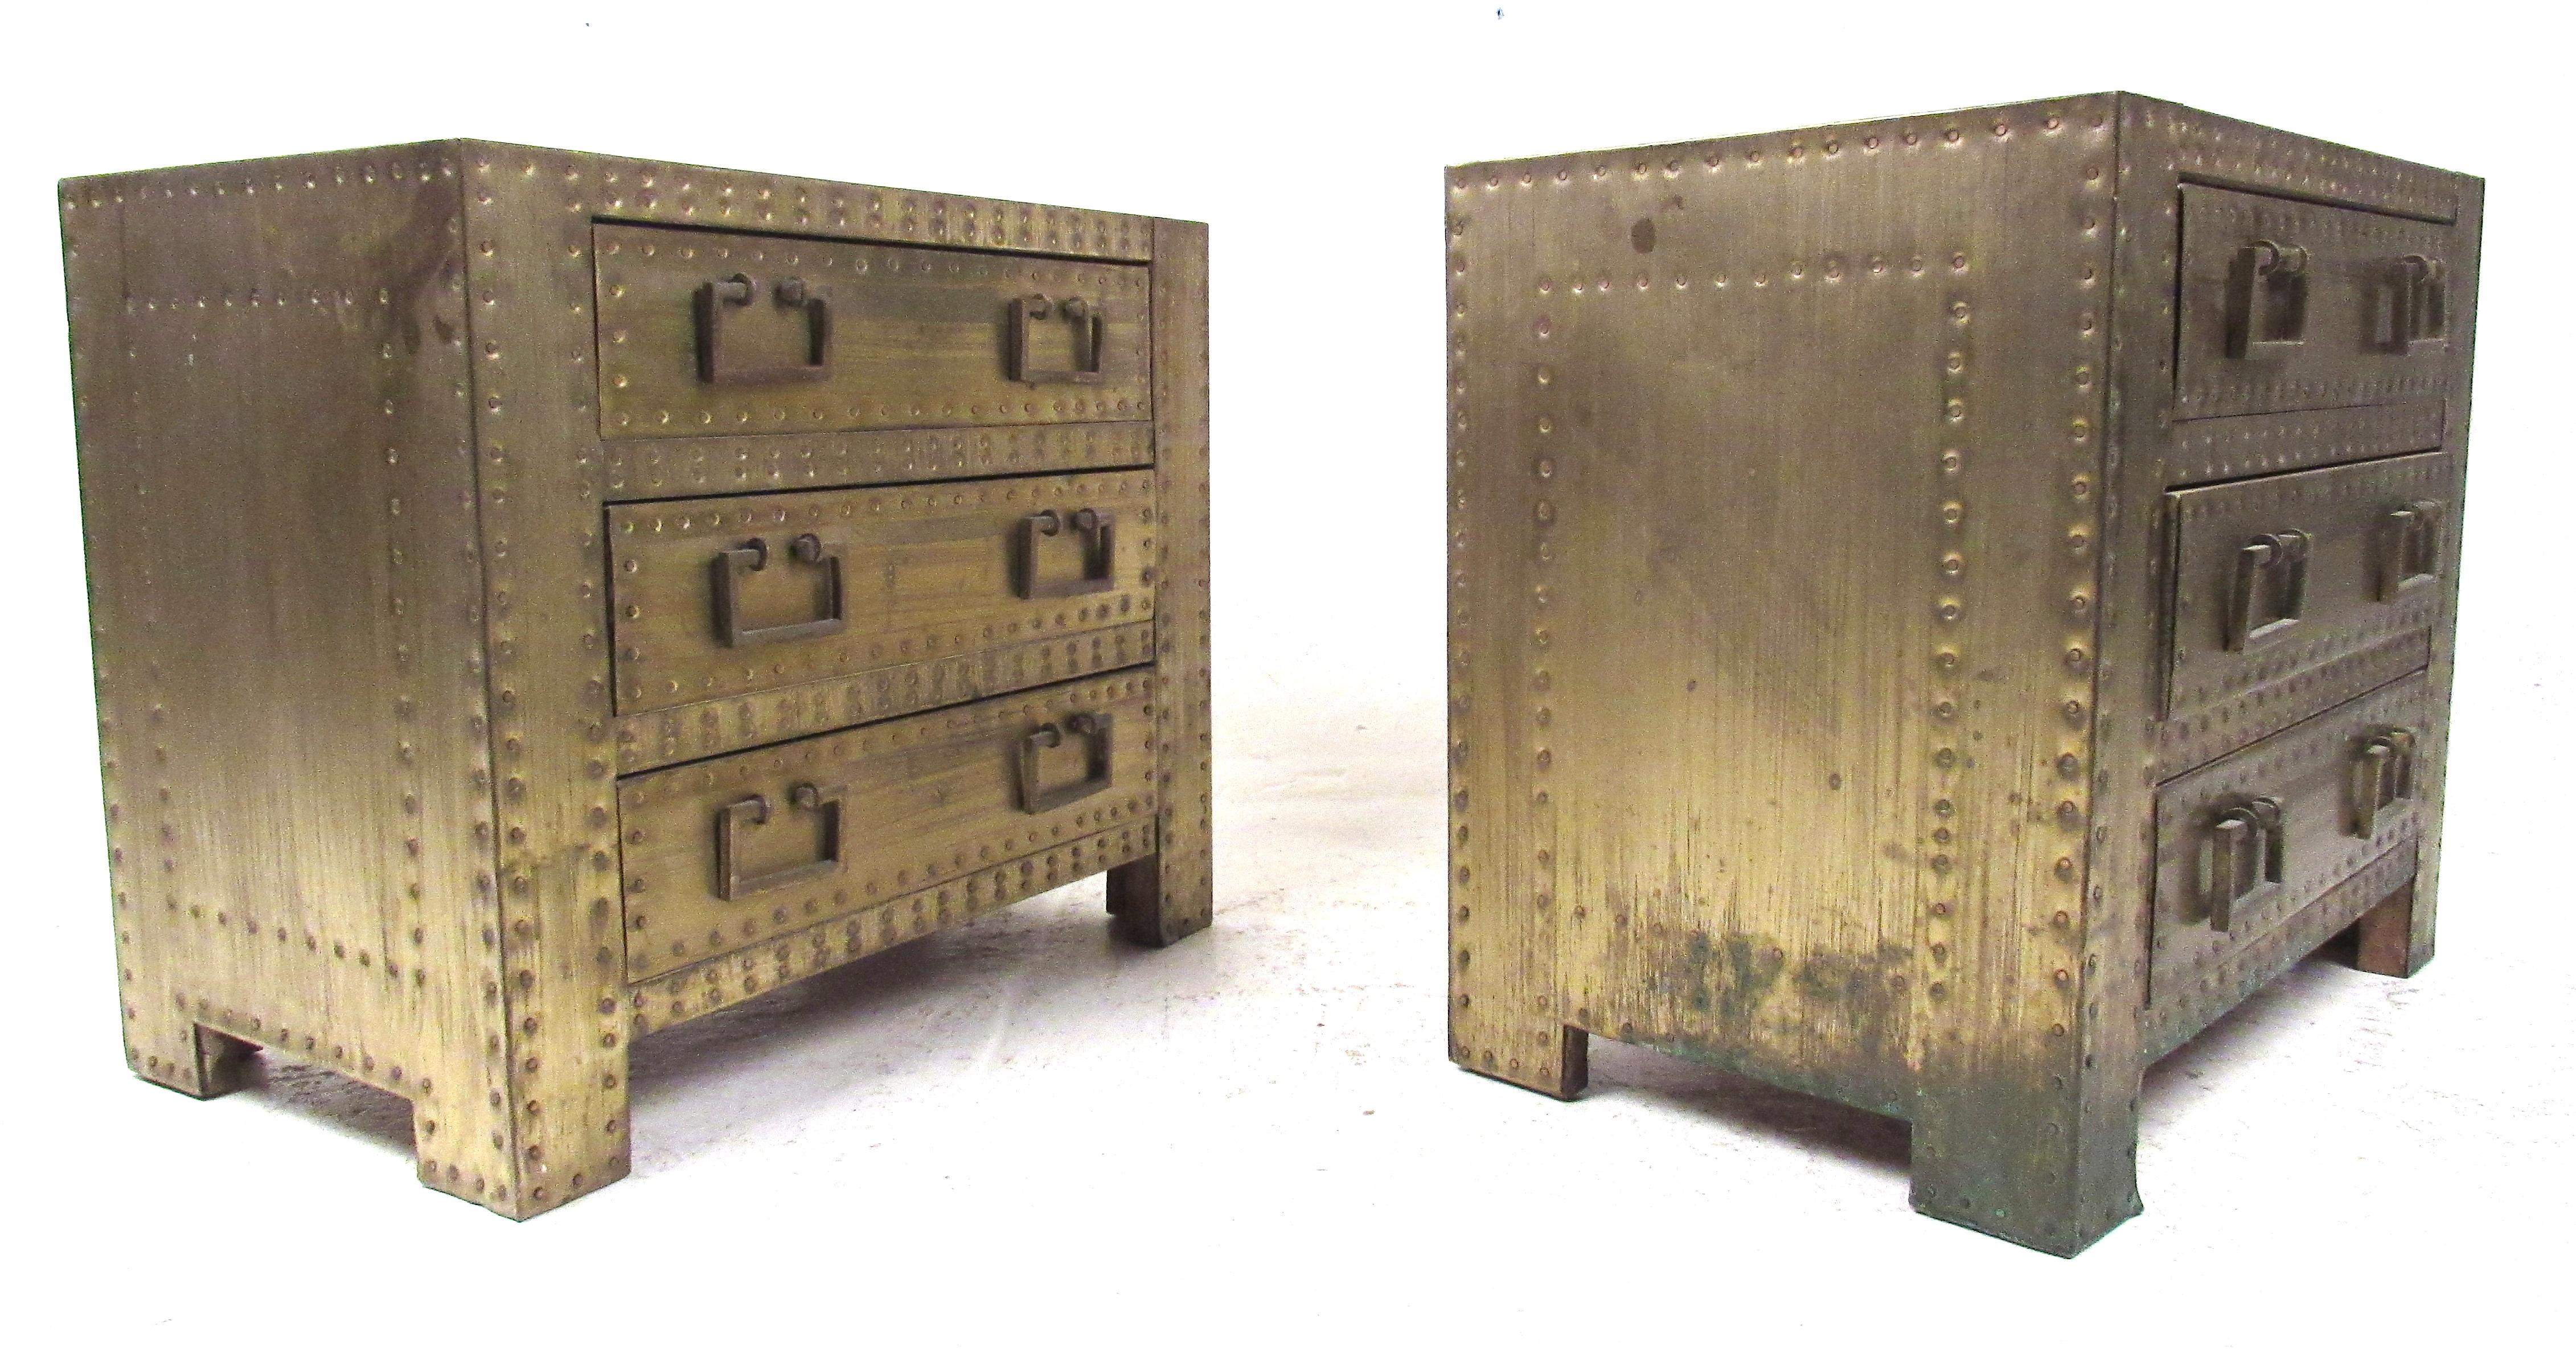 Great pair of brass-clad and copper-nail studded 3-drawer chests by Sarreid, Ltd., circa 1970s. Smaller in scale, these richly patinated cabinets make ideal bedside nightstands. Please confirm item location (NY or NJ) with dealer.